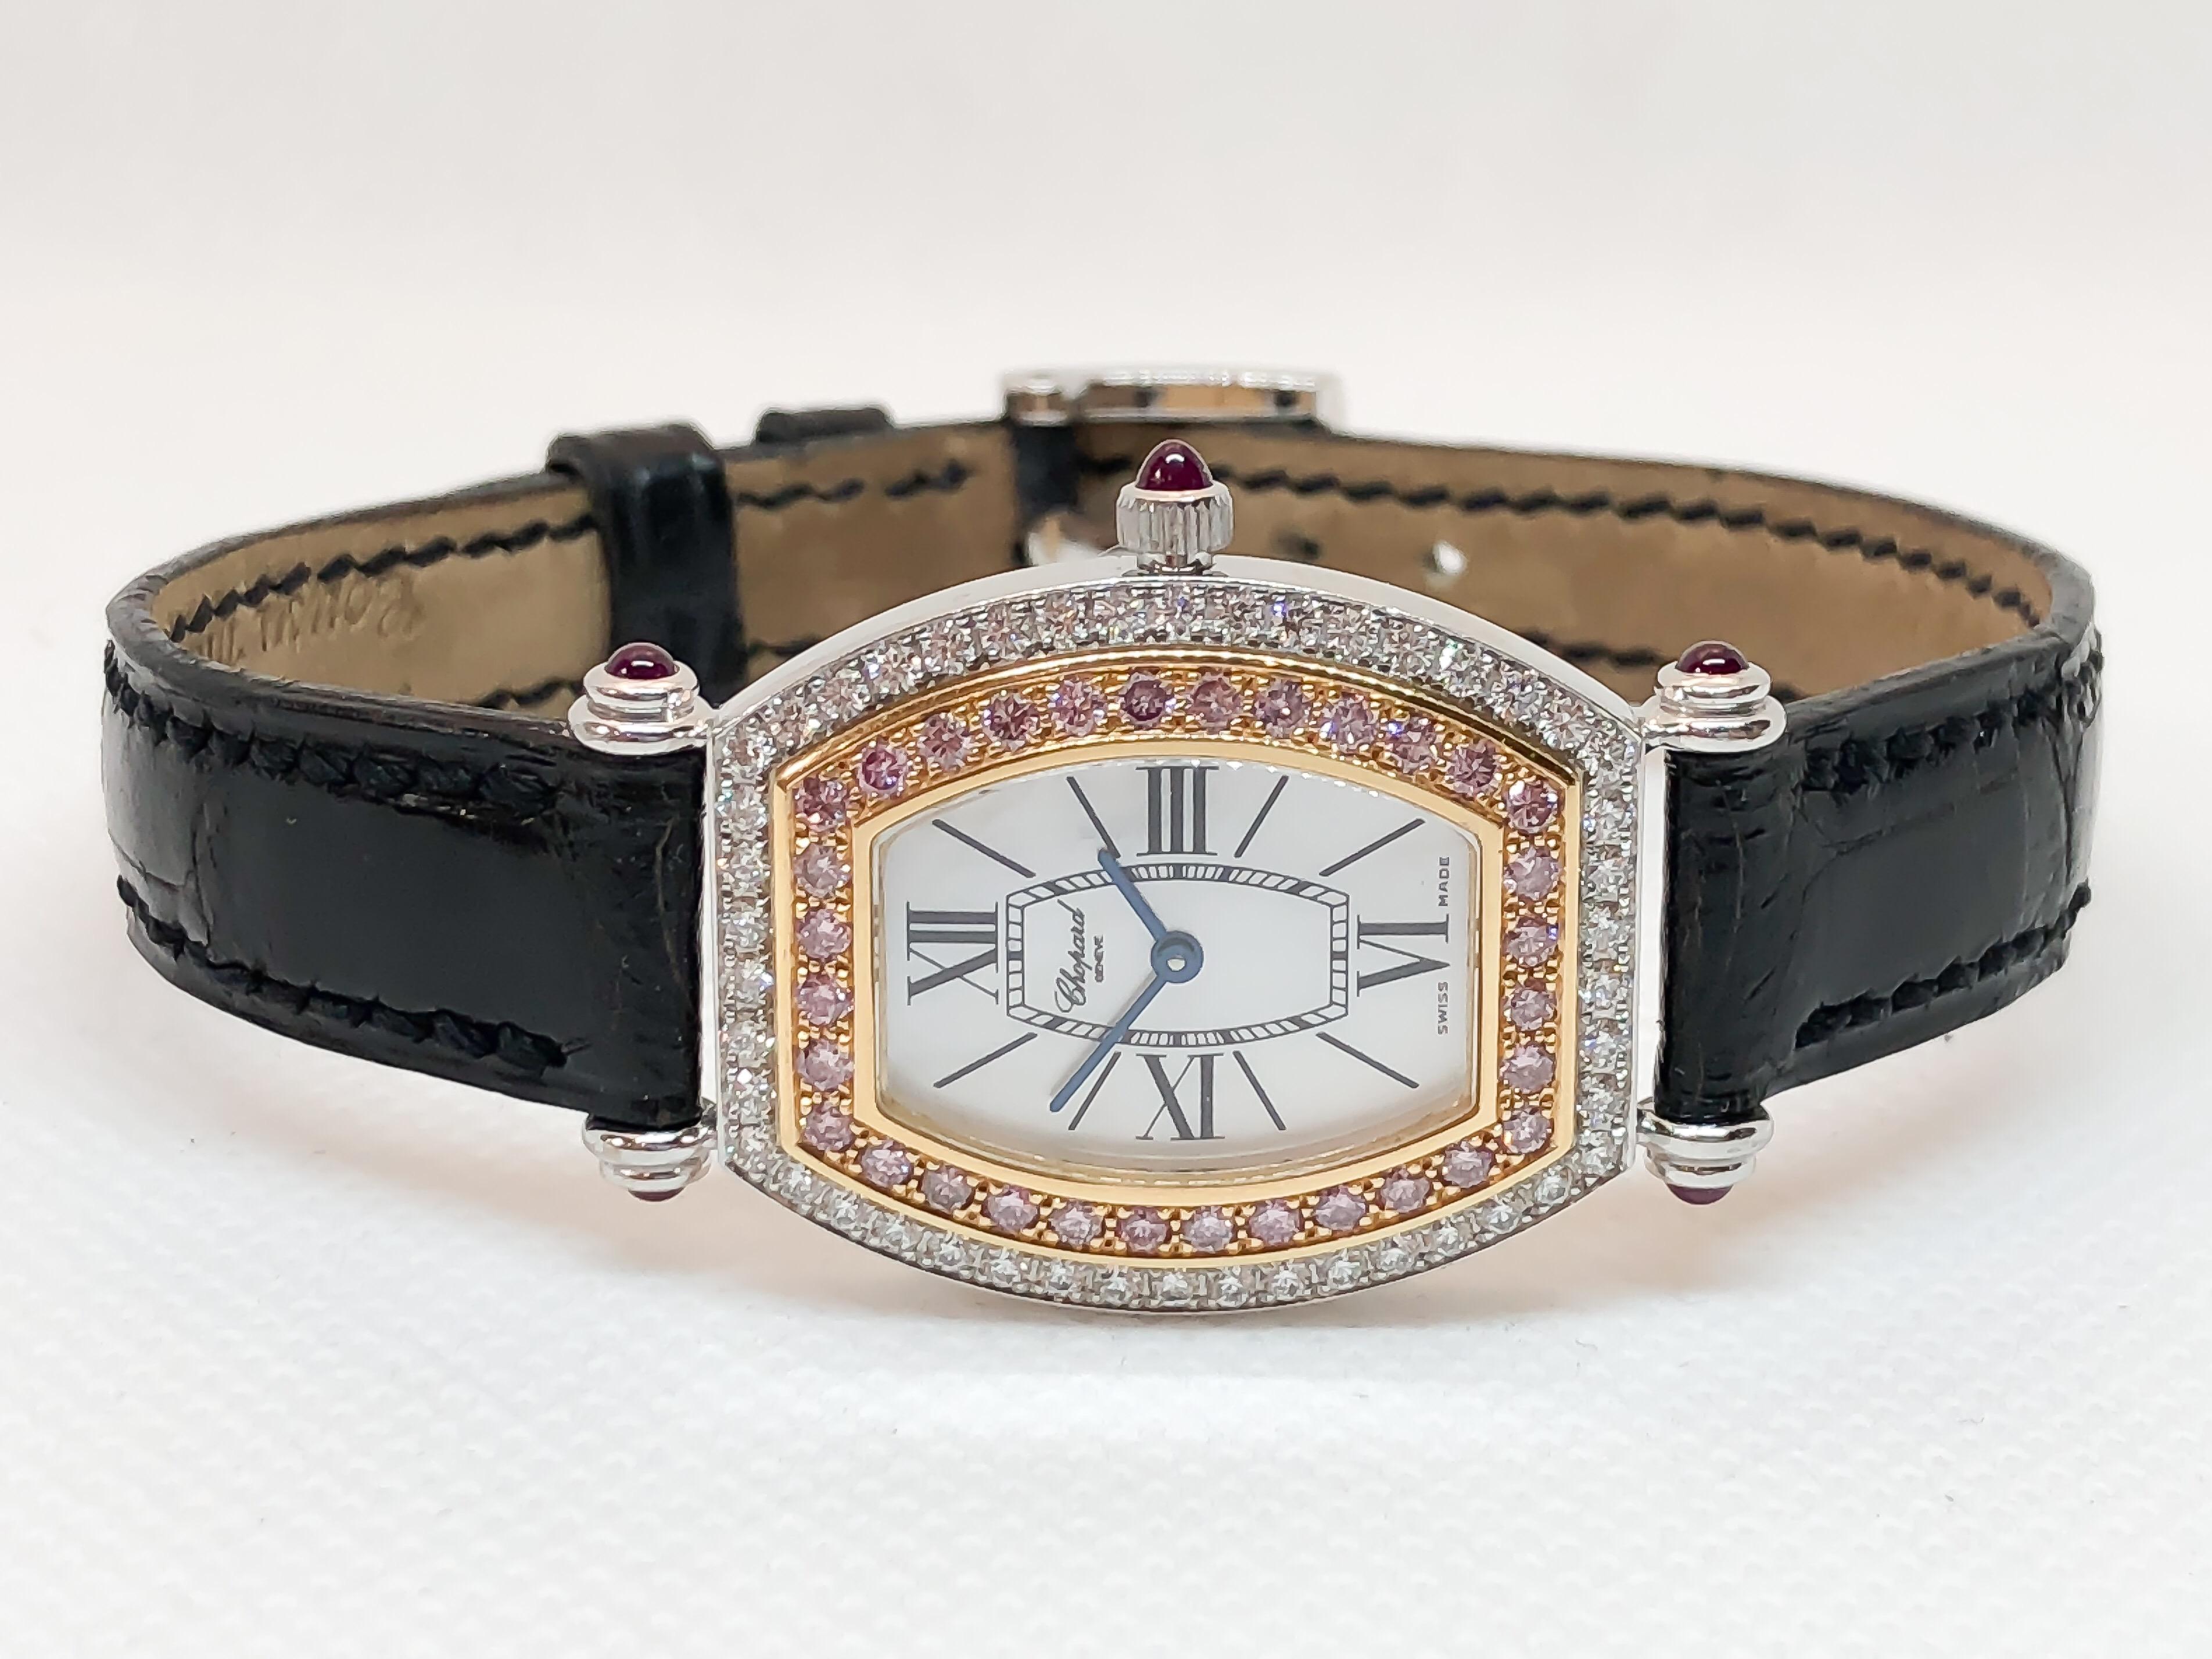 Lovely feminine Chopard watch set with stunning pink and white diamonds in 18 karat rose and white gold. Tonneau shape case attached to a black Chopard leather strap with ruby crown and lug accents. Comes with original box, papers & three extra